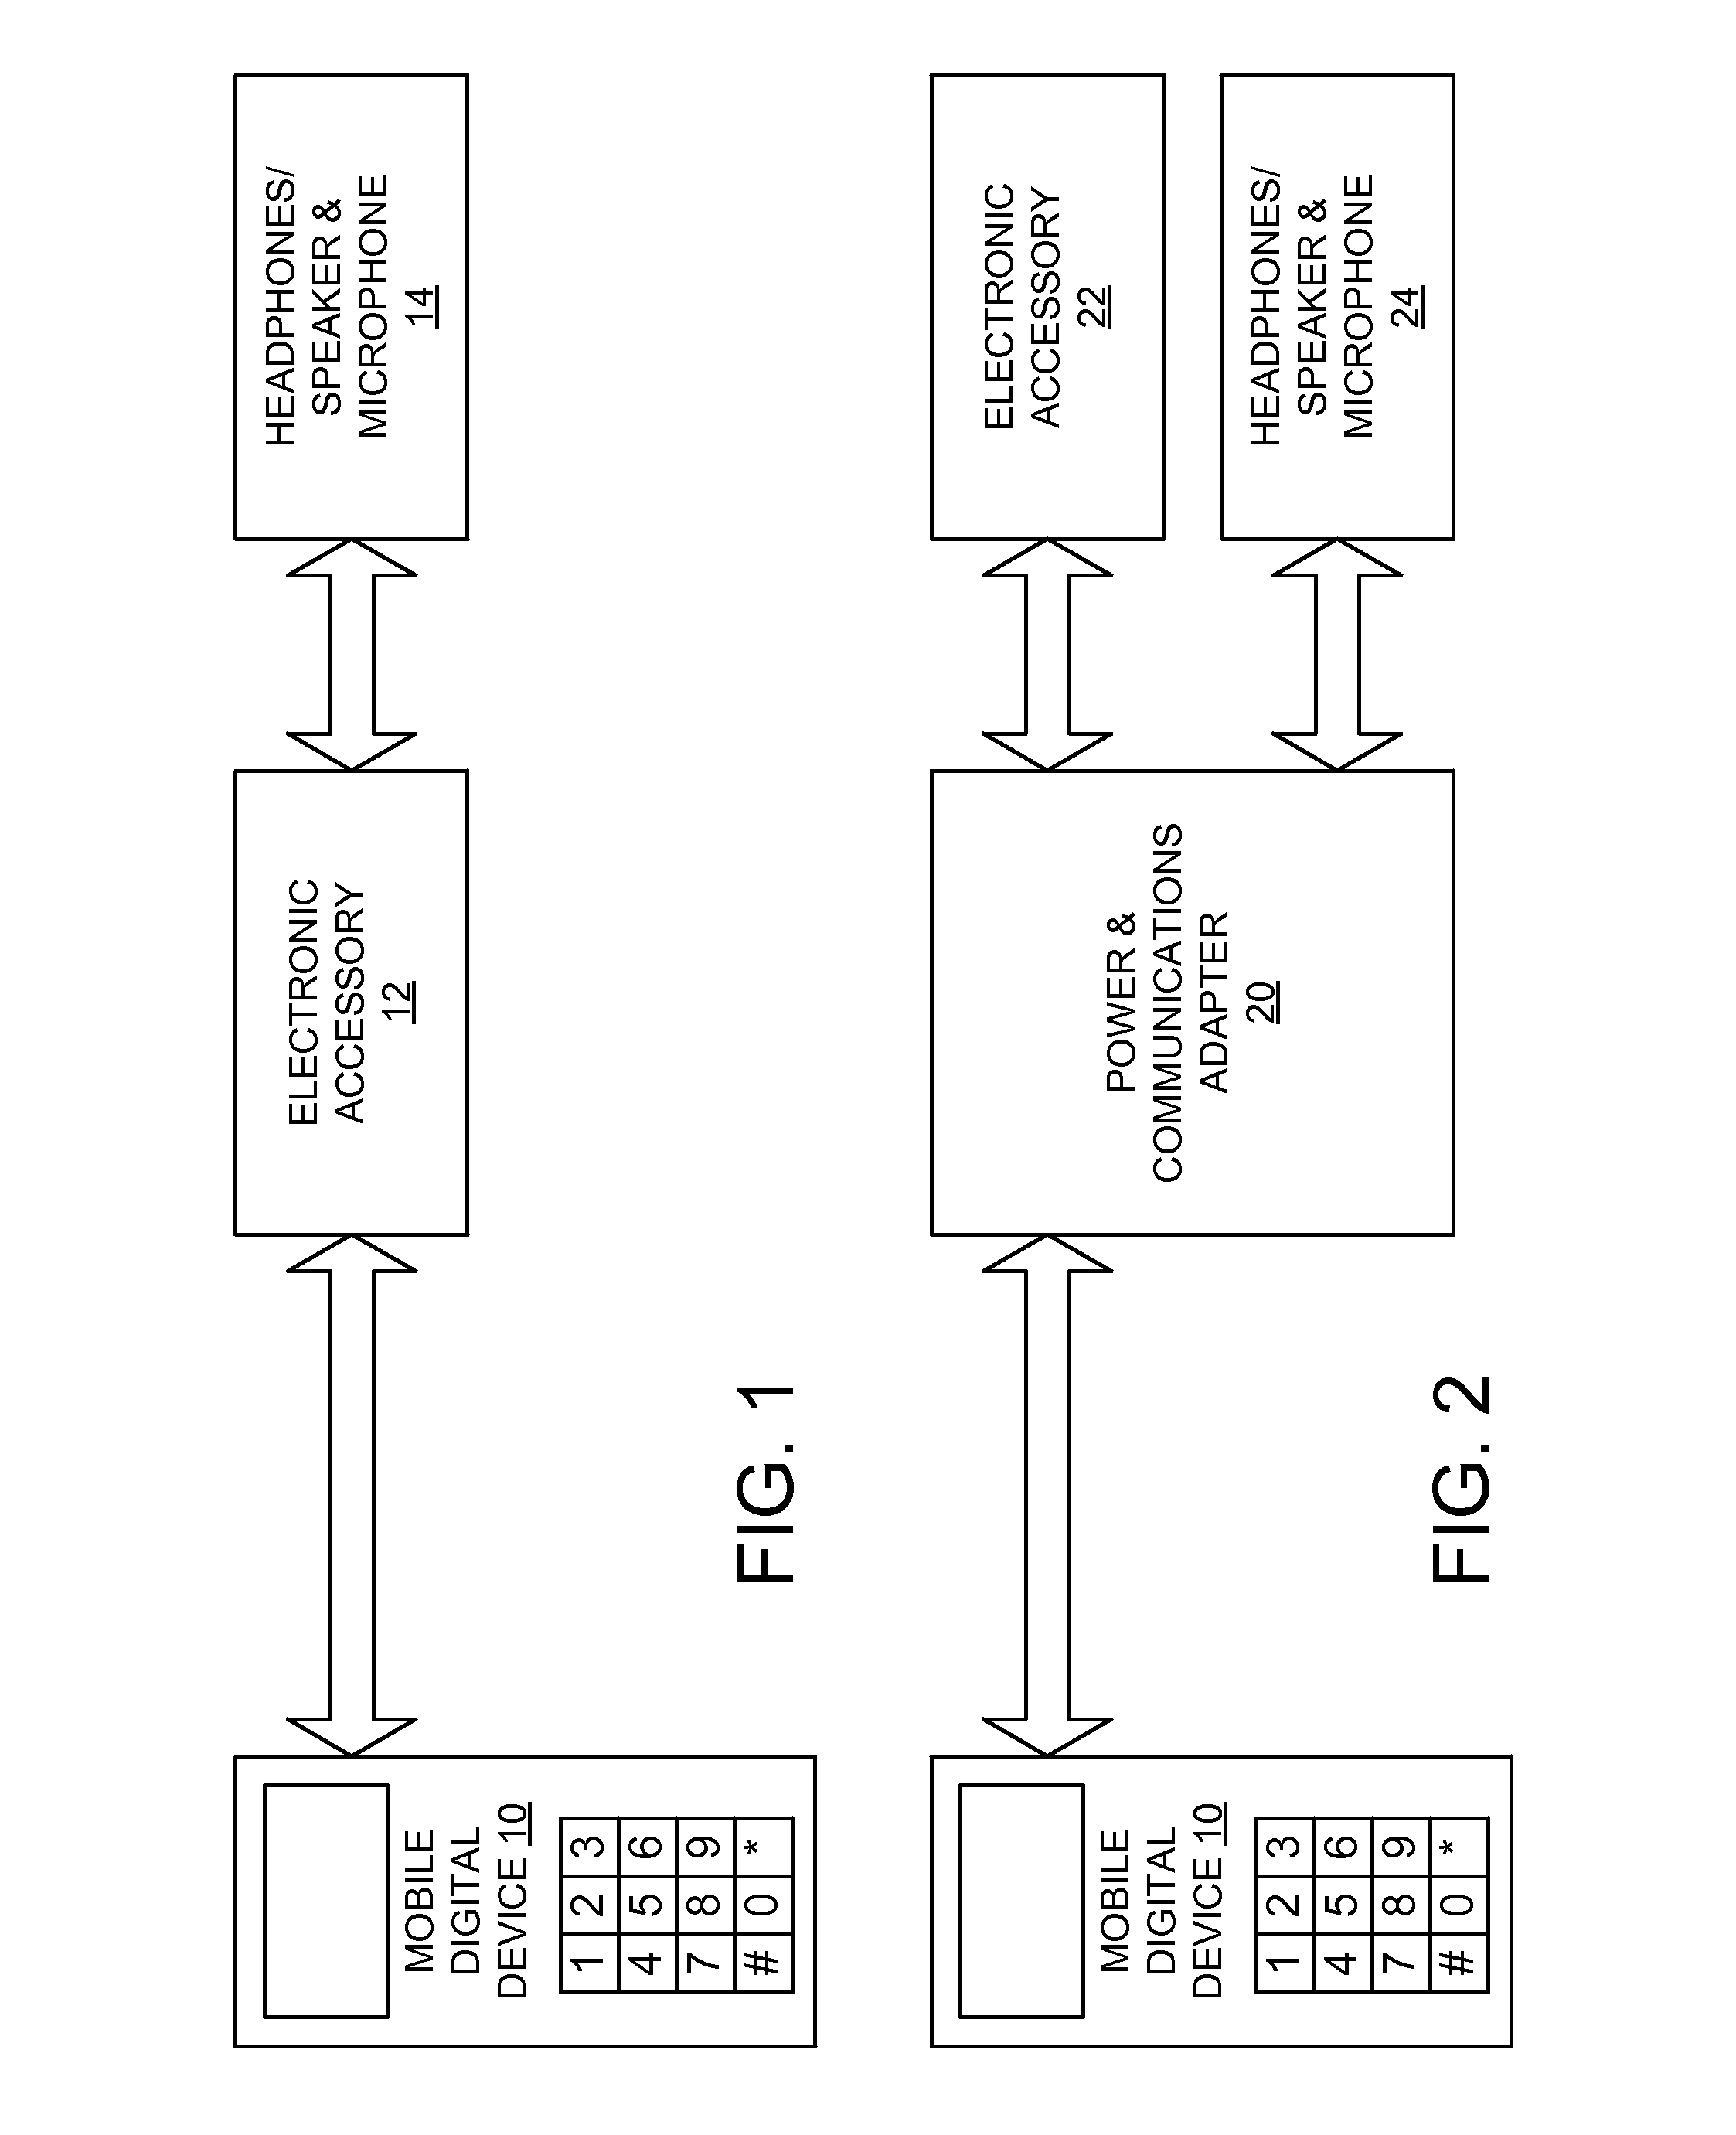 Method and Apparatus for Controlling and Powering an Electronic Accessory from a Mobile Digital Device